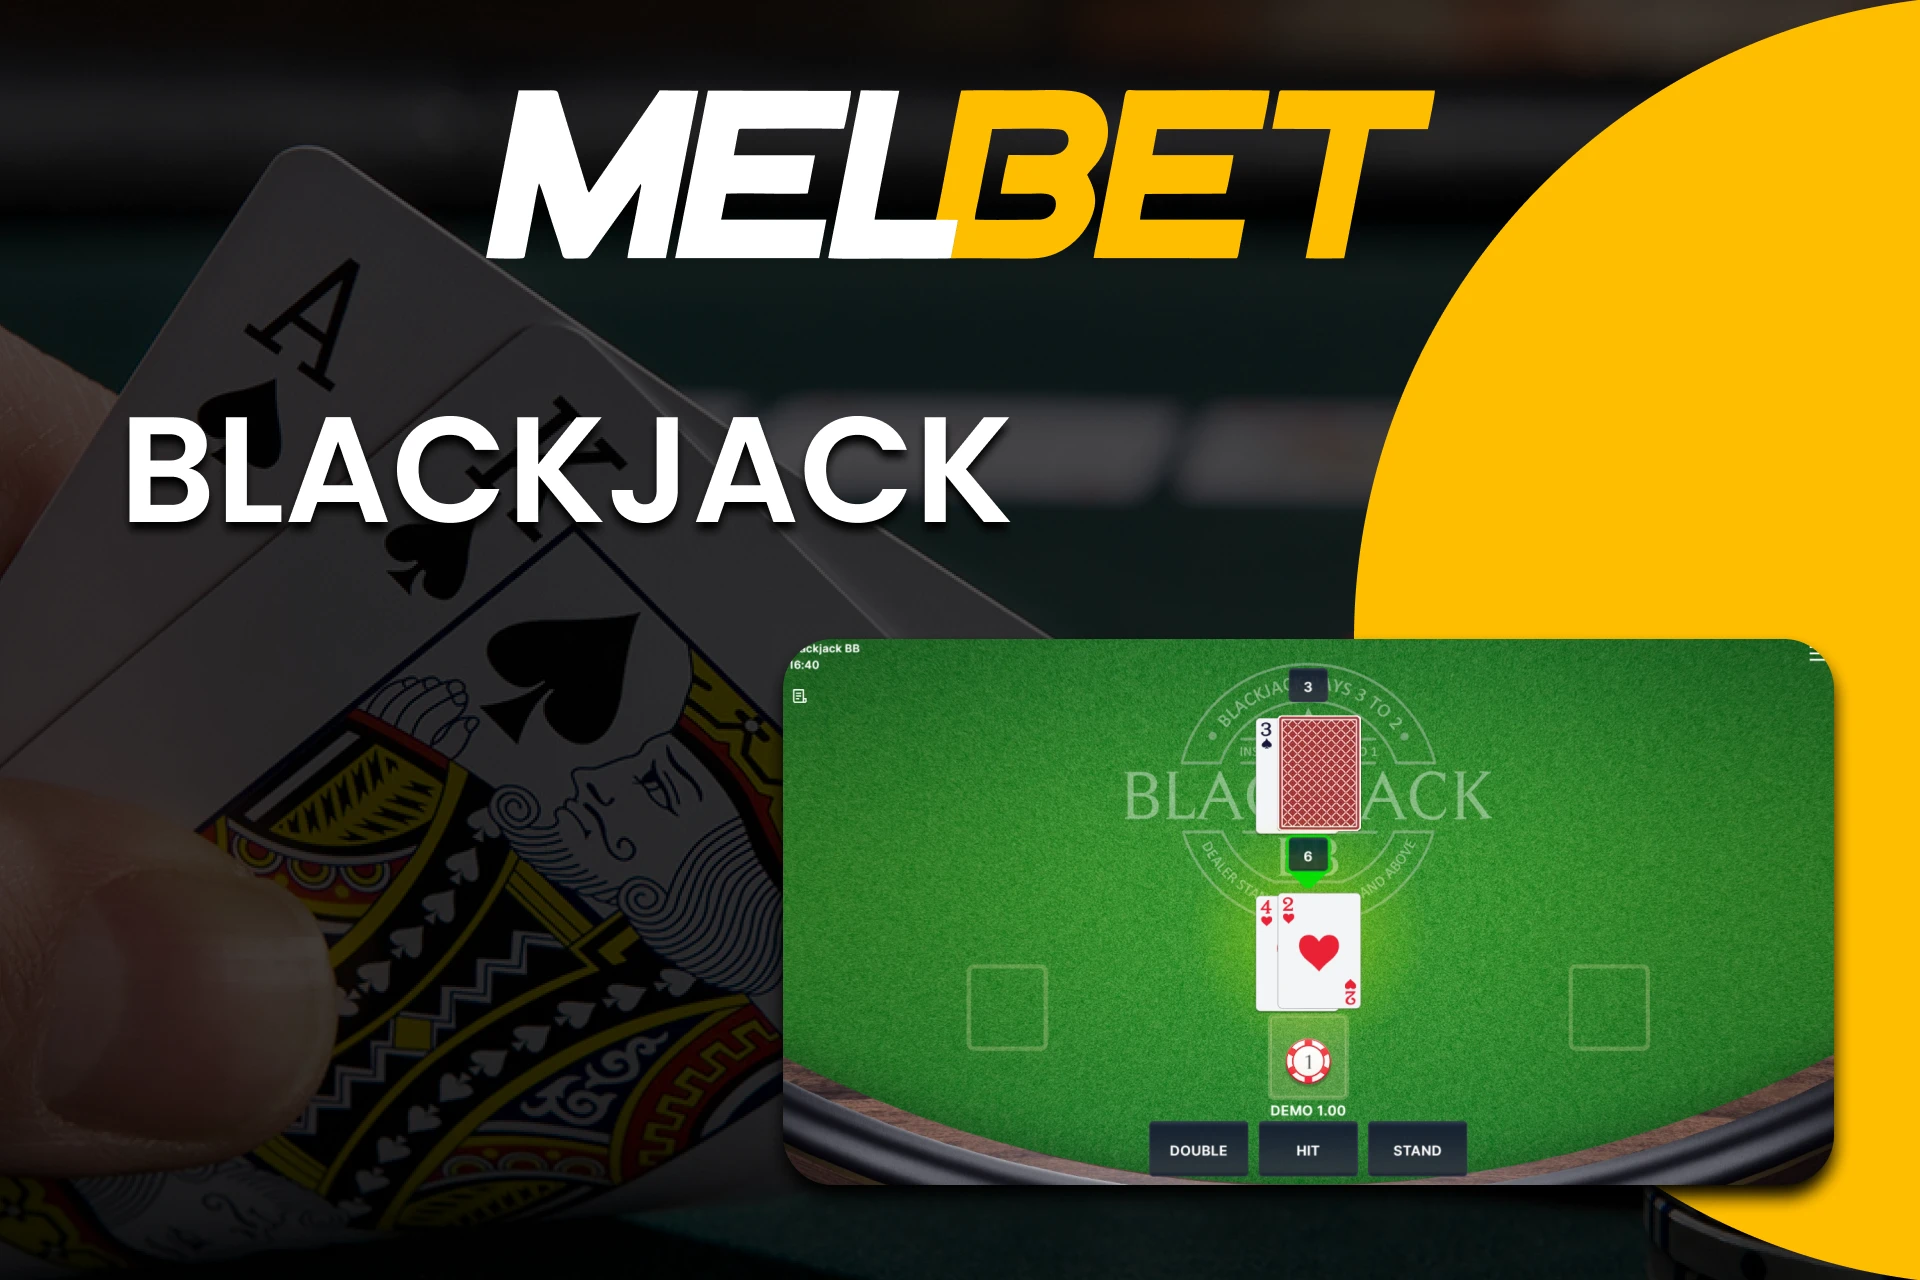 Choose Blackjack from the Jackpot section on Melbet.